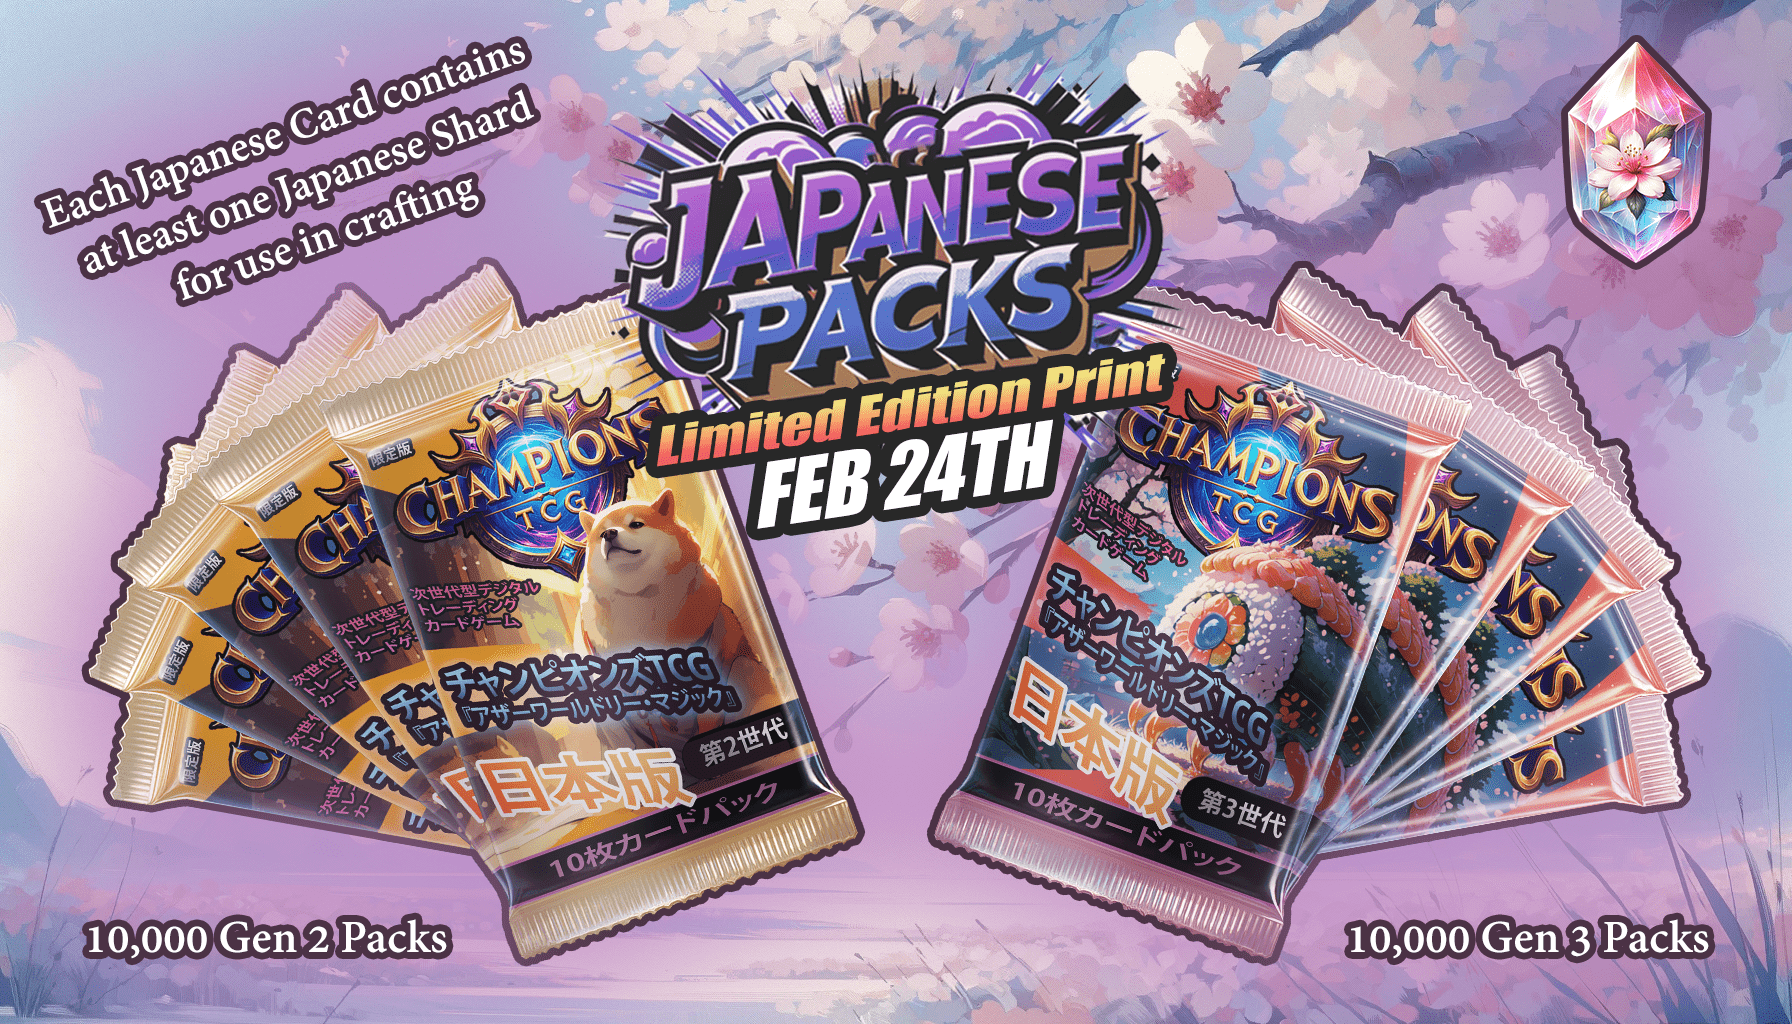 Japanese Edition Packs are live in Champions TCG